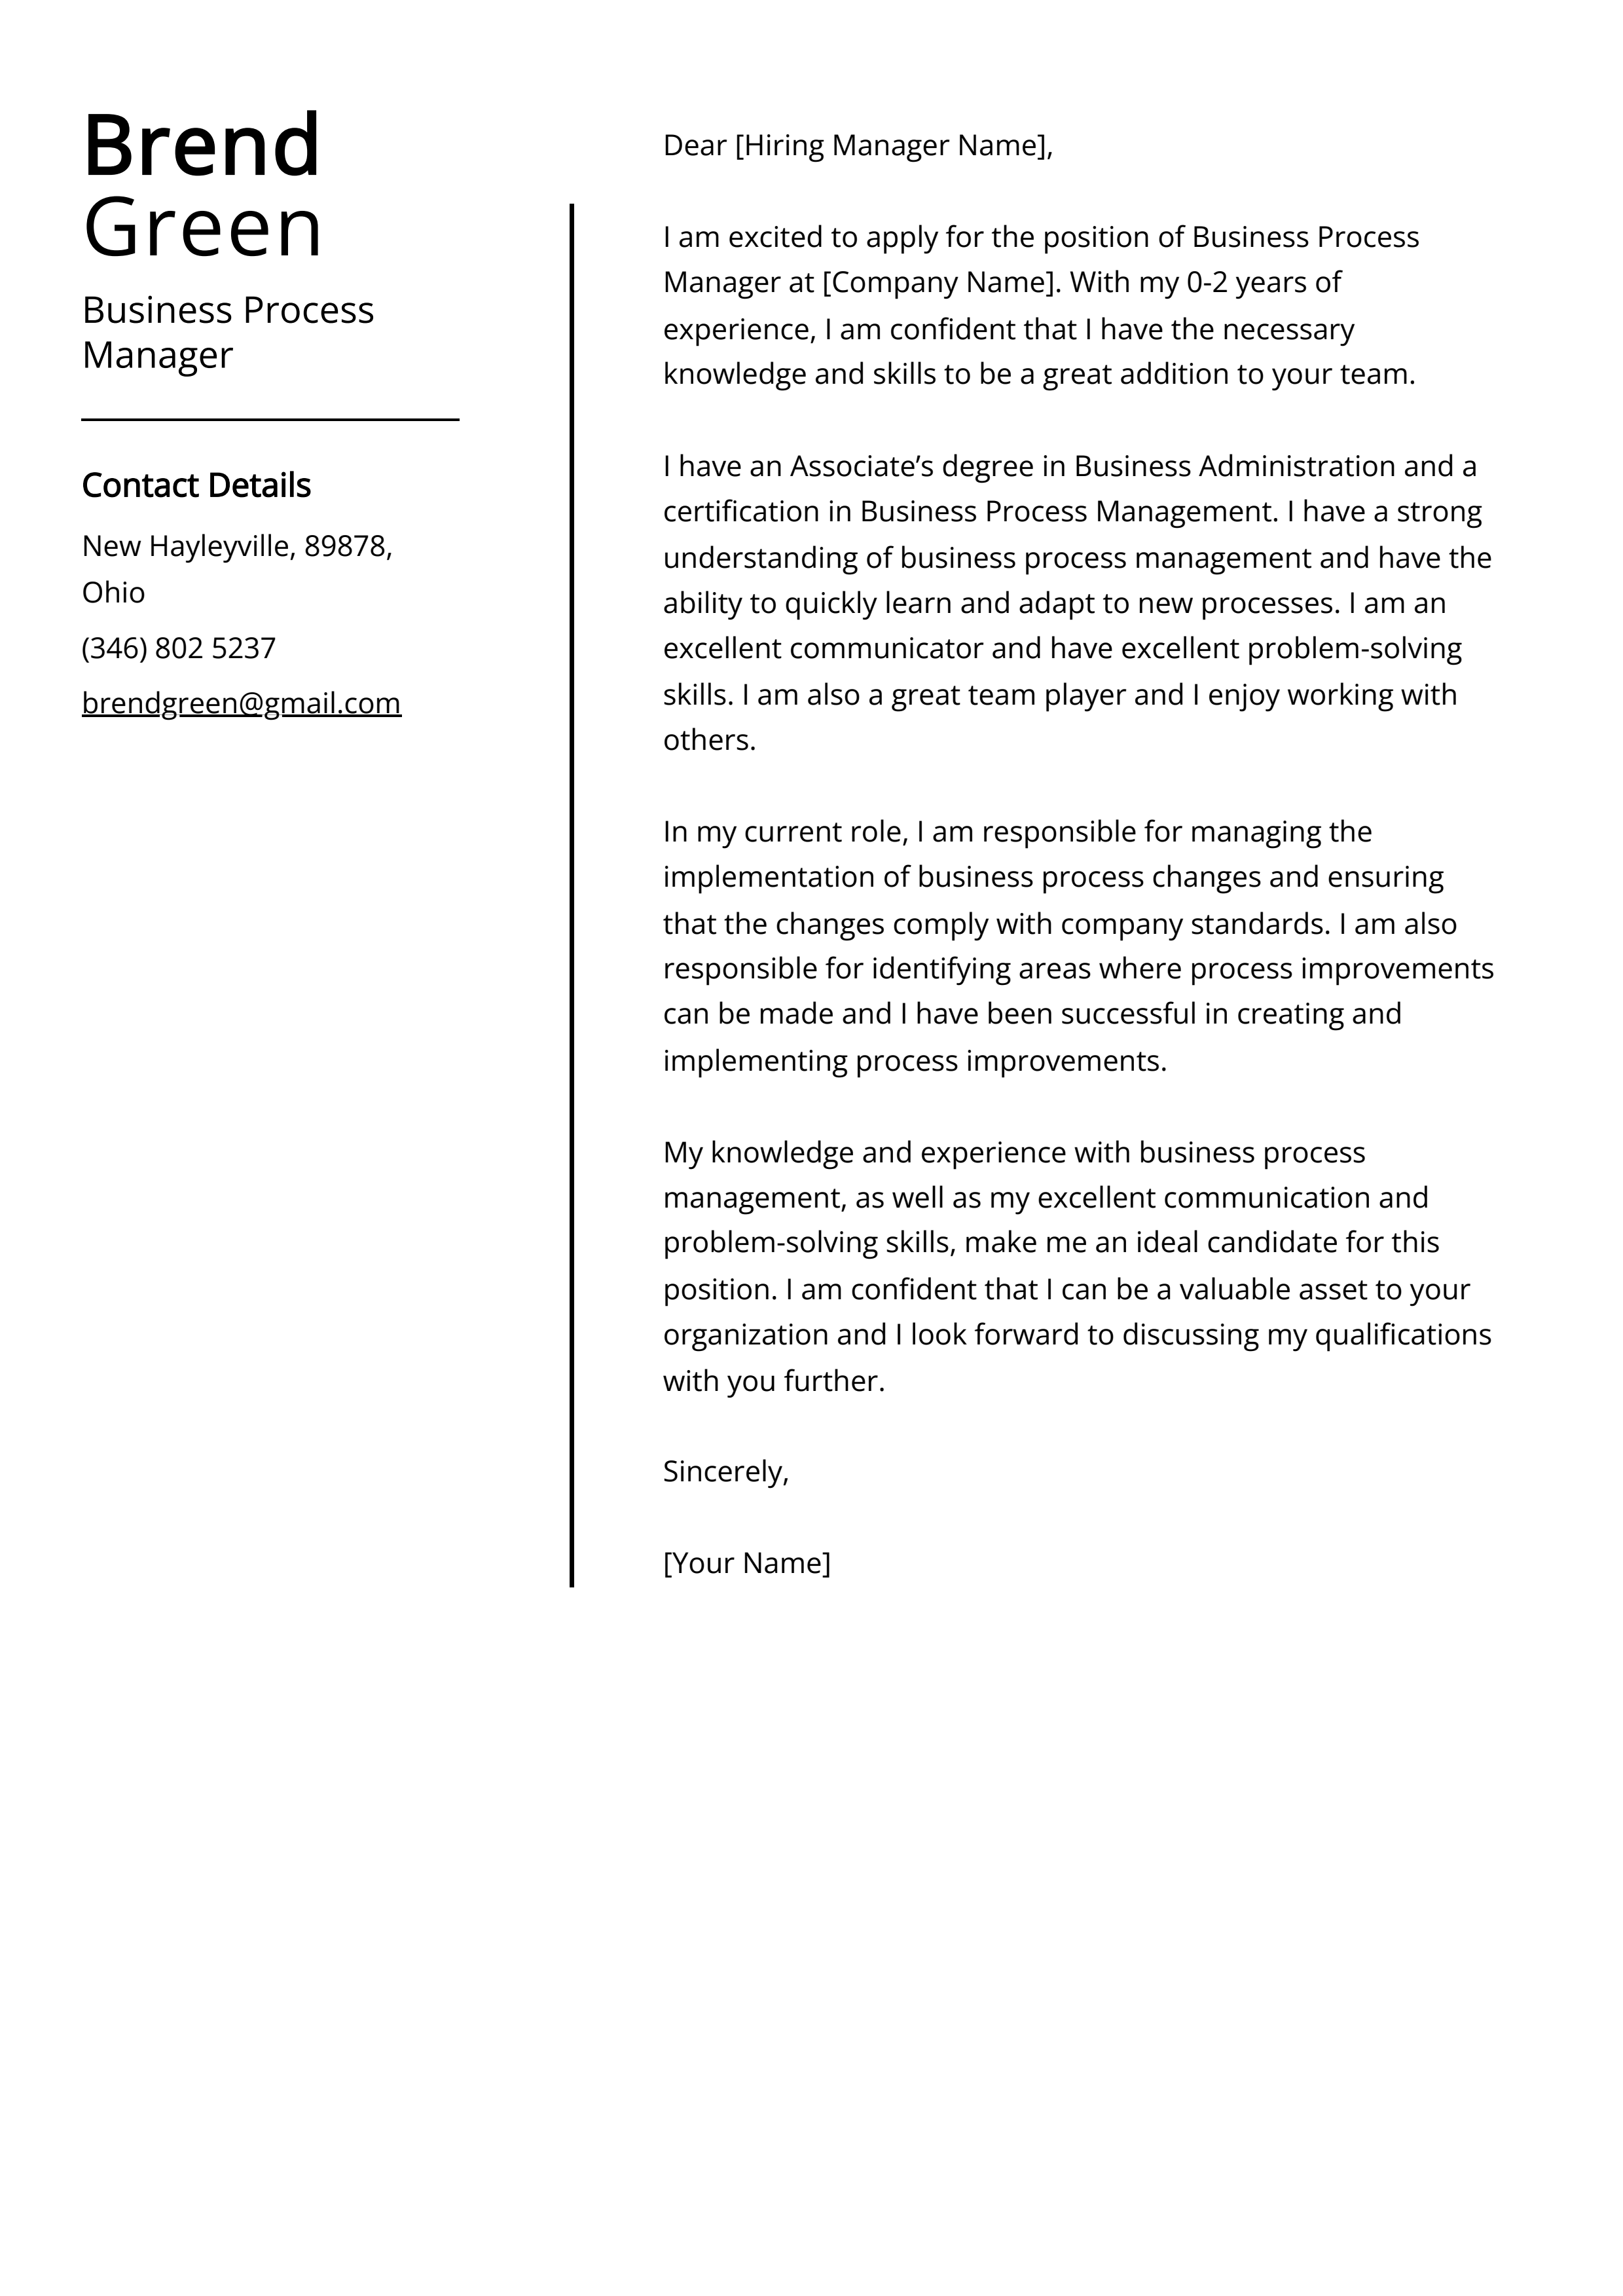 Business Process Manager Cover Letter Example